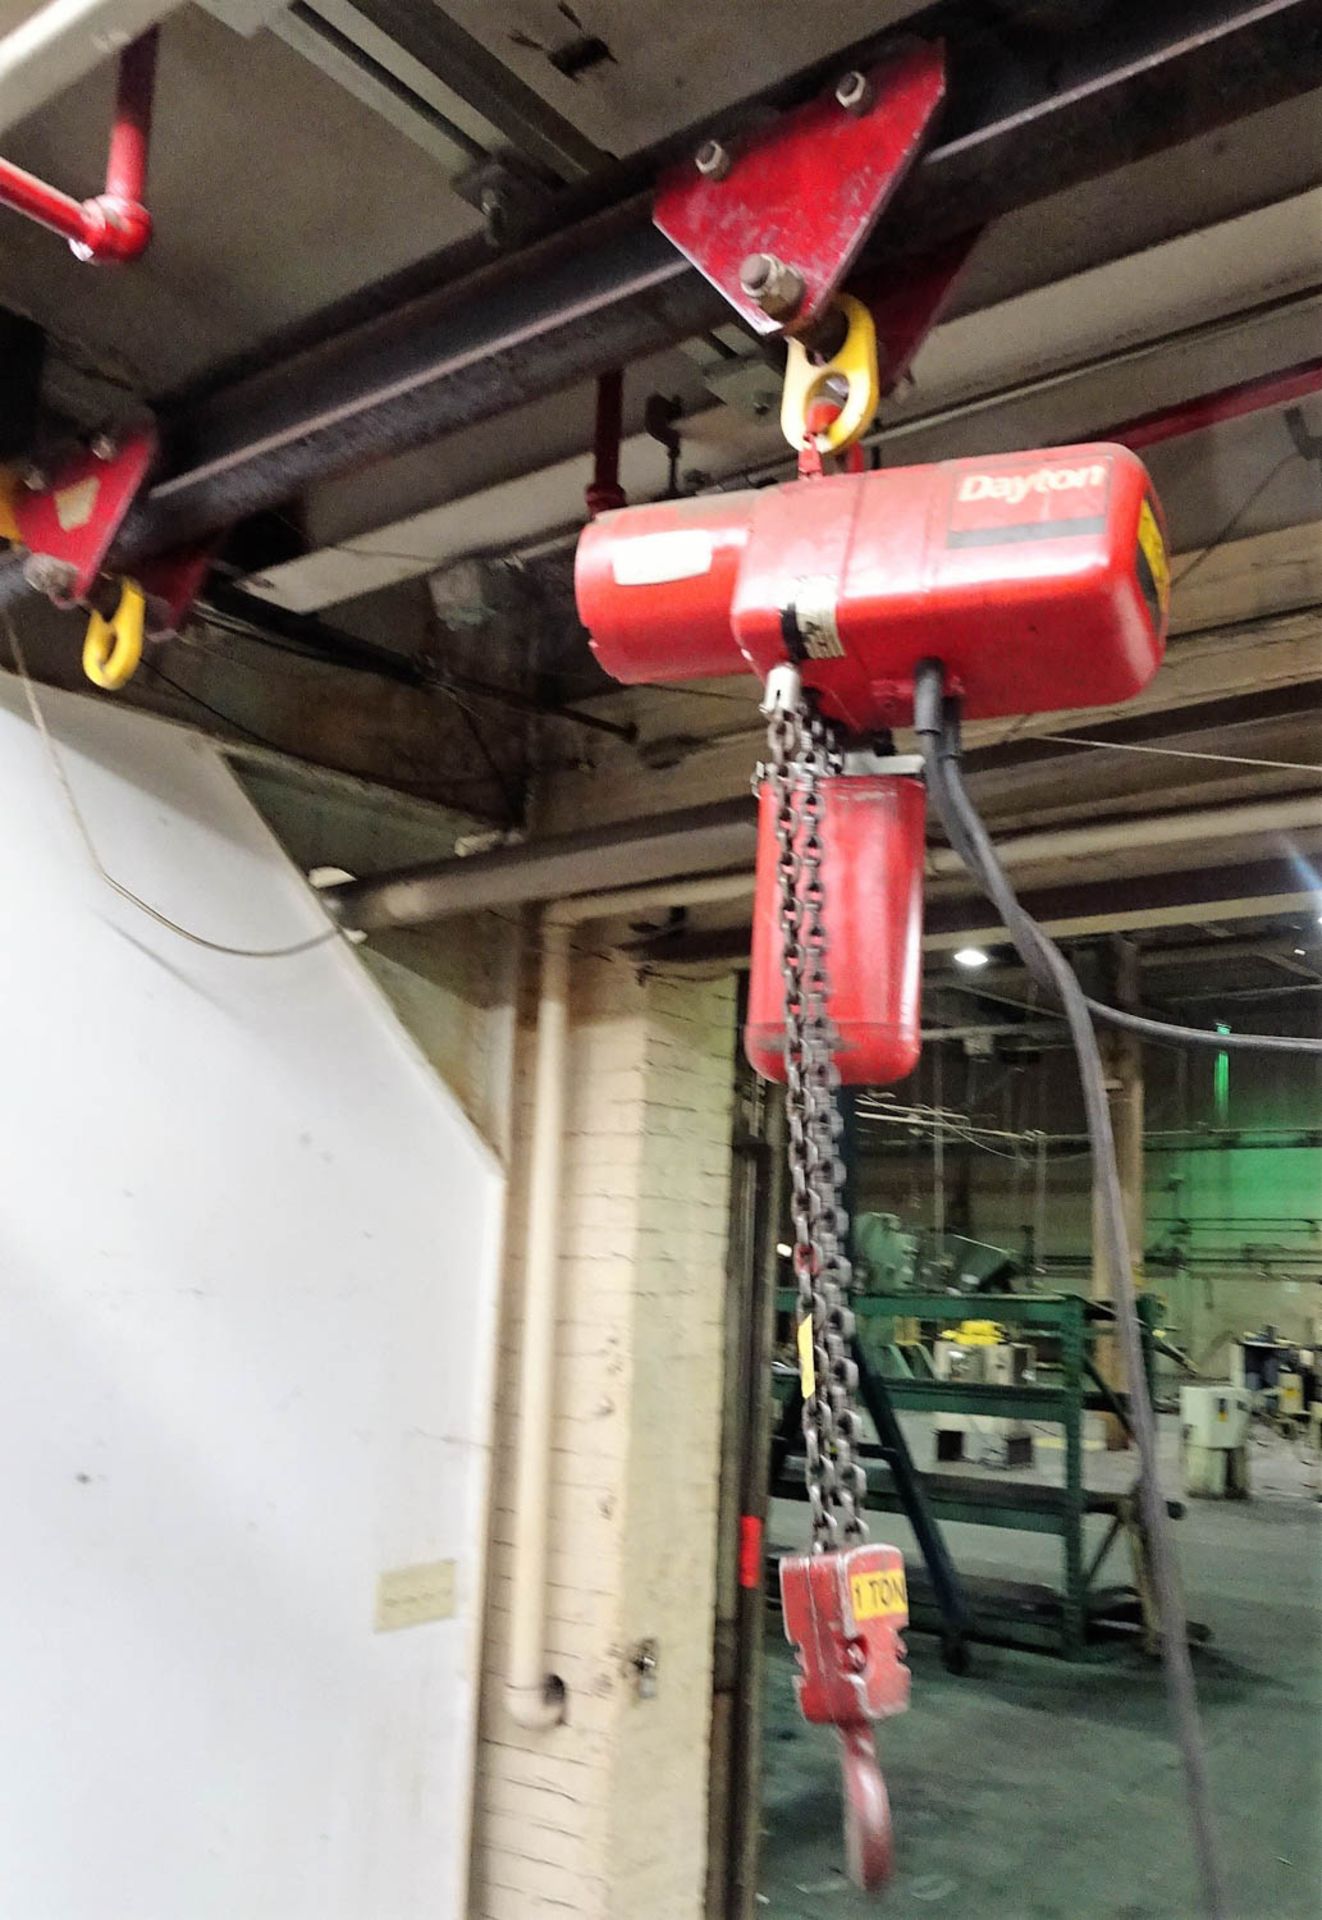 (2) DAYTON 1 TON ELECTRIC CHAIN HOISTS, WITH DROP PENDANT CONTROLS, AND I-BEAM TROLLEYS - Image 2 of 2